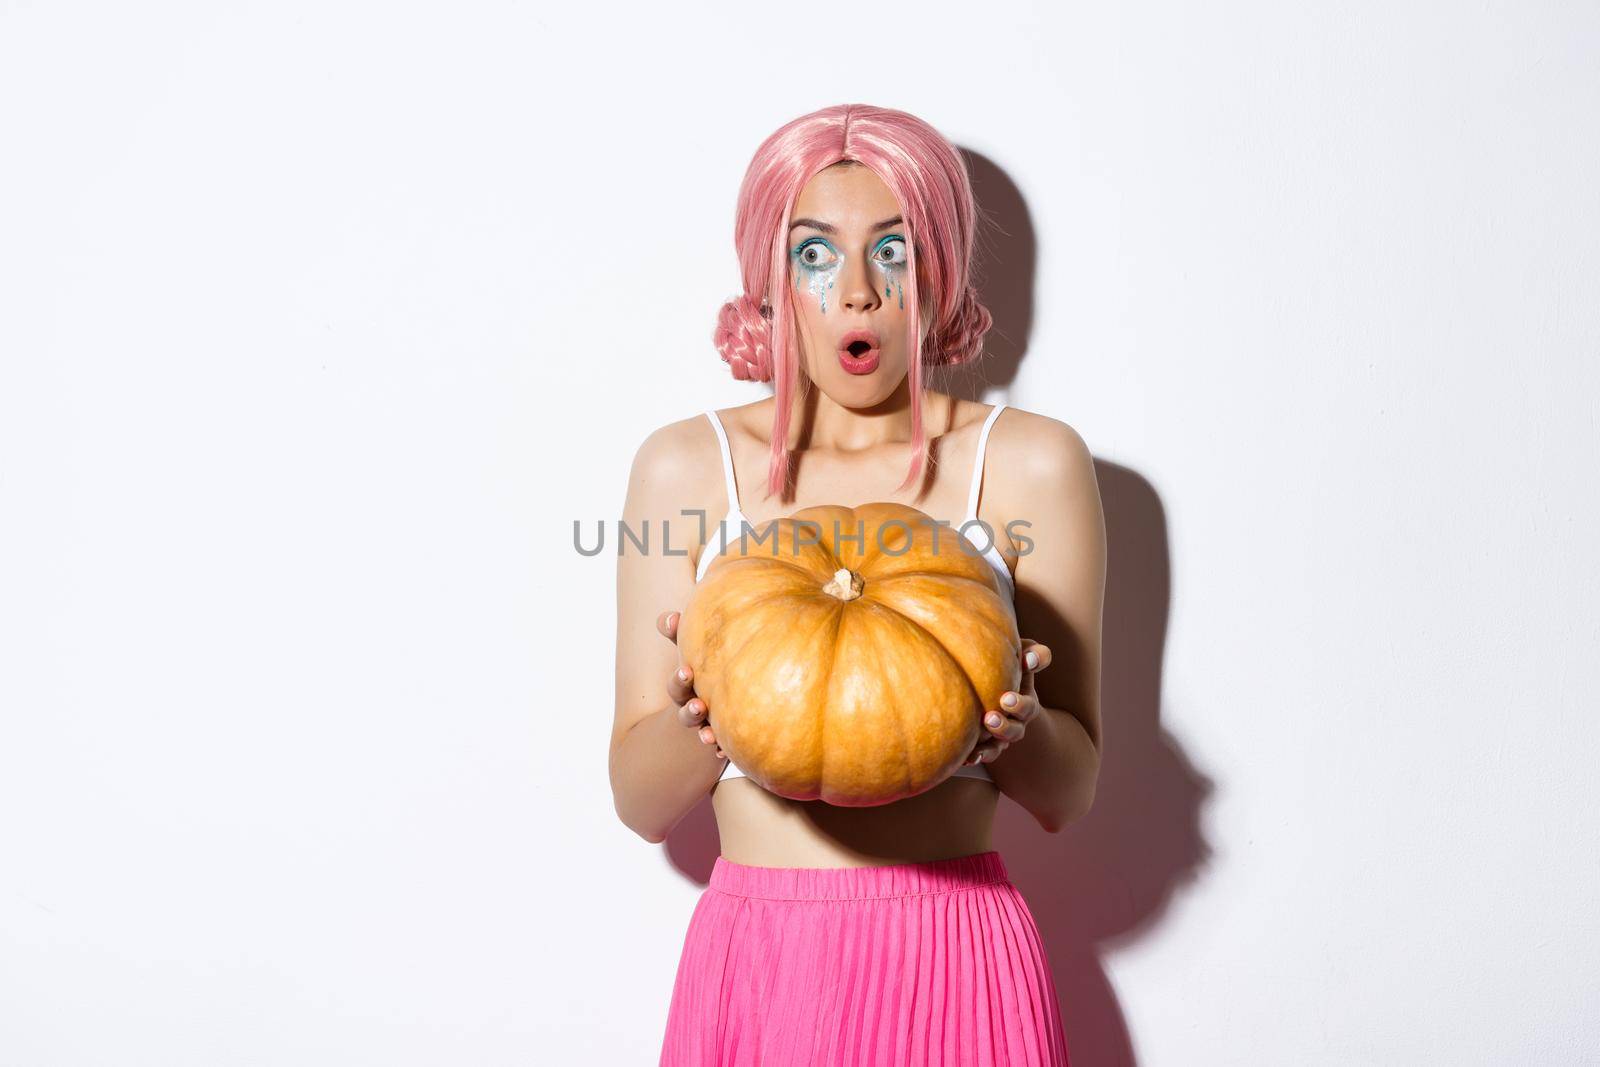 Portrait of amazed young party girl in pink wig, holding big pumpkin and looking left in awe, celebrating halloween, standing over white background.